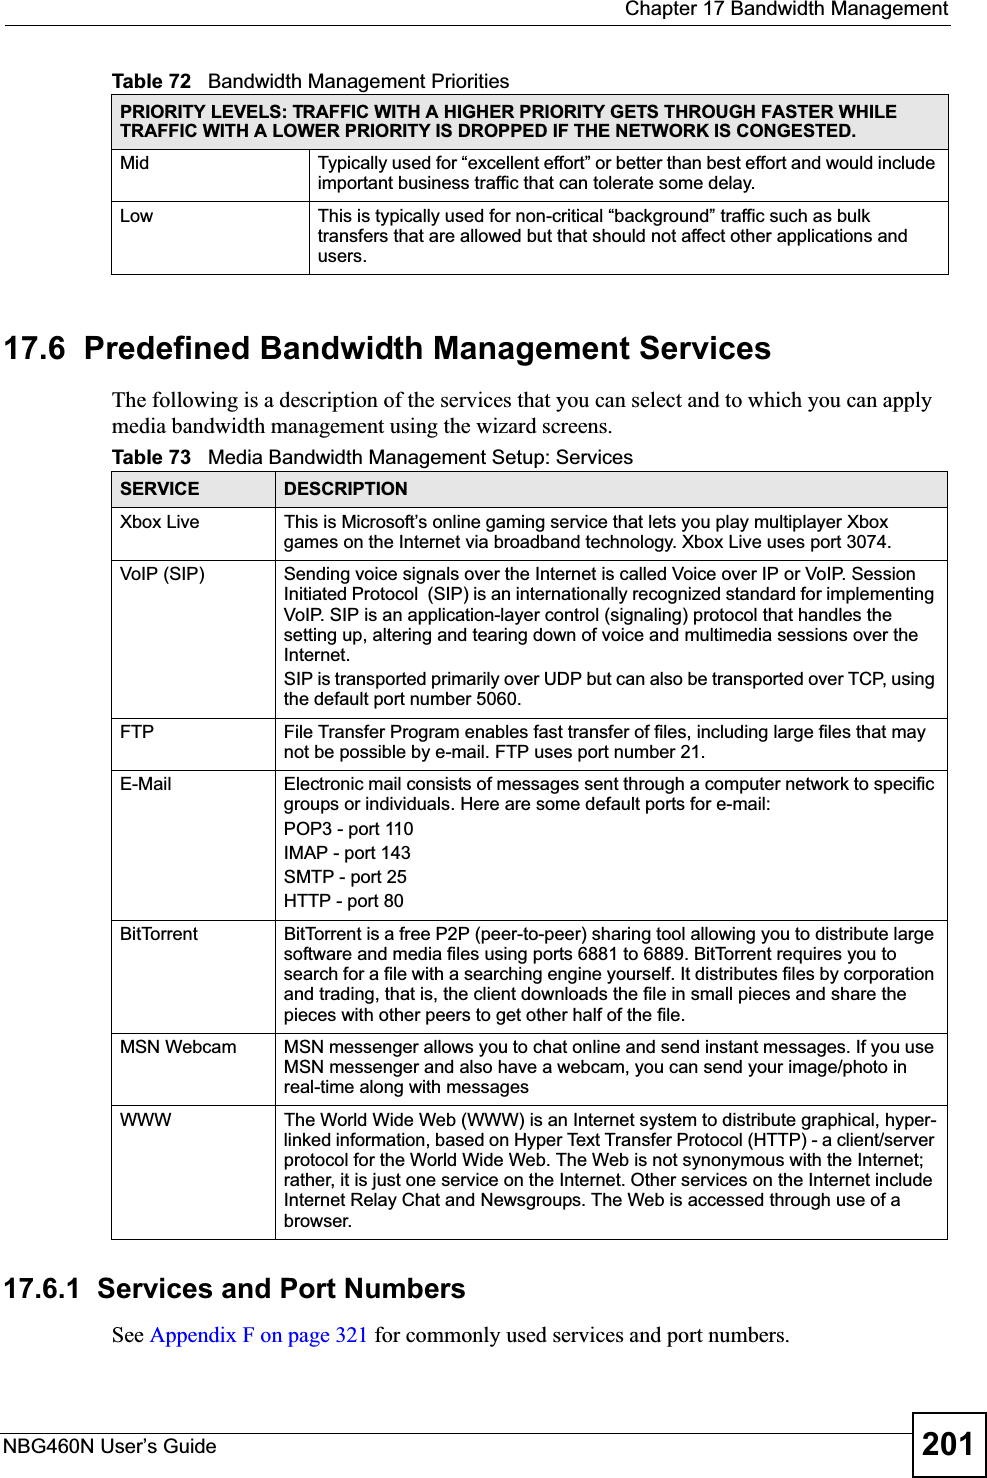  Chapter 17 Bandwidth ManagementNBG460N User’s Guide 20117.6  Predefined Bandwidth Management ServicesThe following is a description of the services that you can select and to which you can apply media bandwidth management using the wizard screens. 17.6.1  Services and Port NumbersSee Appendix F on page 321 for commonly used services and port numbers.Mid  Typically used for “excellent effort” or better than best effort and would include important business traffic that can tolerate some delay.Low This is typically used for non-critical “background” traffic such as bulk transfers that are allowed but that should not affect other applications and users.Table 72   Bandwidth Management PrioritiesPRIORITY LEVELS: TRAFFIC WITH A HIGHER PRIORITY GETS THROUGH FASTER WHILE TRAFFIC WITH A LOWER PRIORITY IS DROPPED IF THE NETWORK IS CONGESTED.Table 73   Media Bandwidth Management Setup: ServicesSERVICE DESCRIPTIONXbox Live This is Microsoft’s online gaming service that lets you play multiplayer Xbox games on the Internet via broadband technology. Xbox Live uses port 3074.VoIP (SIP) Sending voice signals over the Internet is called Voice over IP or VoIP. Session Initiated Protocol  (SIP) is an internationally recognized standard for implementing VoIP. SIP is an application-layer control (signaling) protocol that handles the setting up, altering and tearing down of voice and multimedia sessions over the Internet.SIP is transported primarily over UDP but can also be transported over TCP, using the default port number 5060. FTP File Transfer Program enables fast transfer of files, including large files that may not be possible by e-mail. FTP uses port number 21.E-Mail Electronic mail consists of messages sent through a computer network to specific groups or individuals. Here are some default ports for e-mail: POP3 - port 110IMAP - port 143SMTP - port 25HTTP - port 80BitTorrent BitTorrent is a free P2P (peer-to-peer) sharing tool allowing you to distribute large software and media files using ports 6881 to 6889. BitTorrent requires you to search for a file with a searching engine yourself. It distributes files by corporation and trading, that is, the client downloads the file in small pieces and share the pieces with other peers to get other half of the file.MSN Webcam MSN messenger allows you to chat online and send instant messages. If you use MSN messenger and also have a webcam, you can send your image/photo in real-time along with messagesWWW The World Wide Web (WWW) is an Internet system to distribute graphical, hyper-linked information, based on Hyper Text Transfer Protocol (HTTP) - a client/server protocol for the World Wide Web. The Web is not synonymous with the Internet; rather, it is just one service on the Internet. Other services on the Internet include Internet Relay Chat and Newsgroups. The Web is accessed through use of a browser.